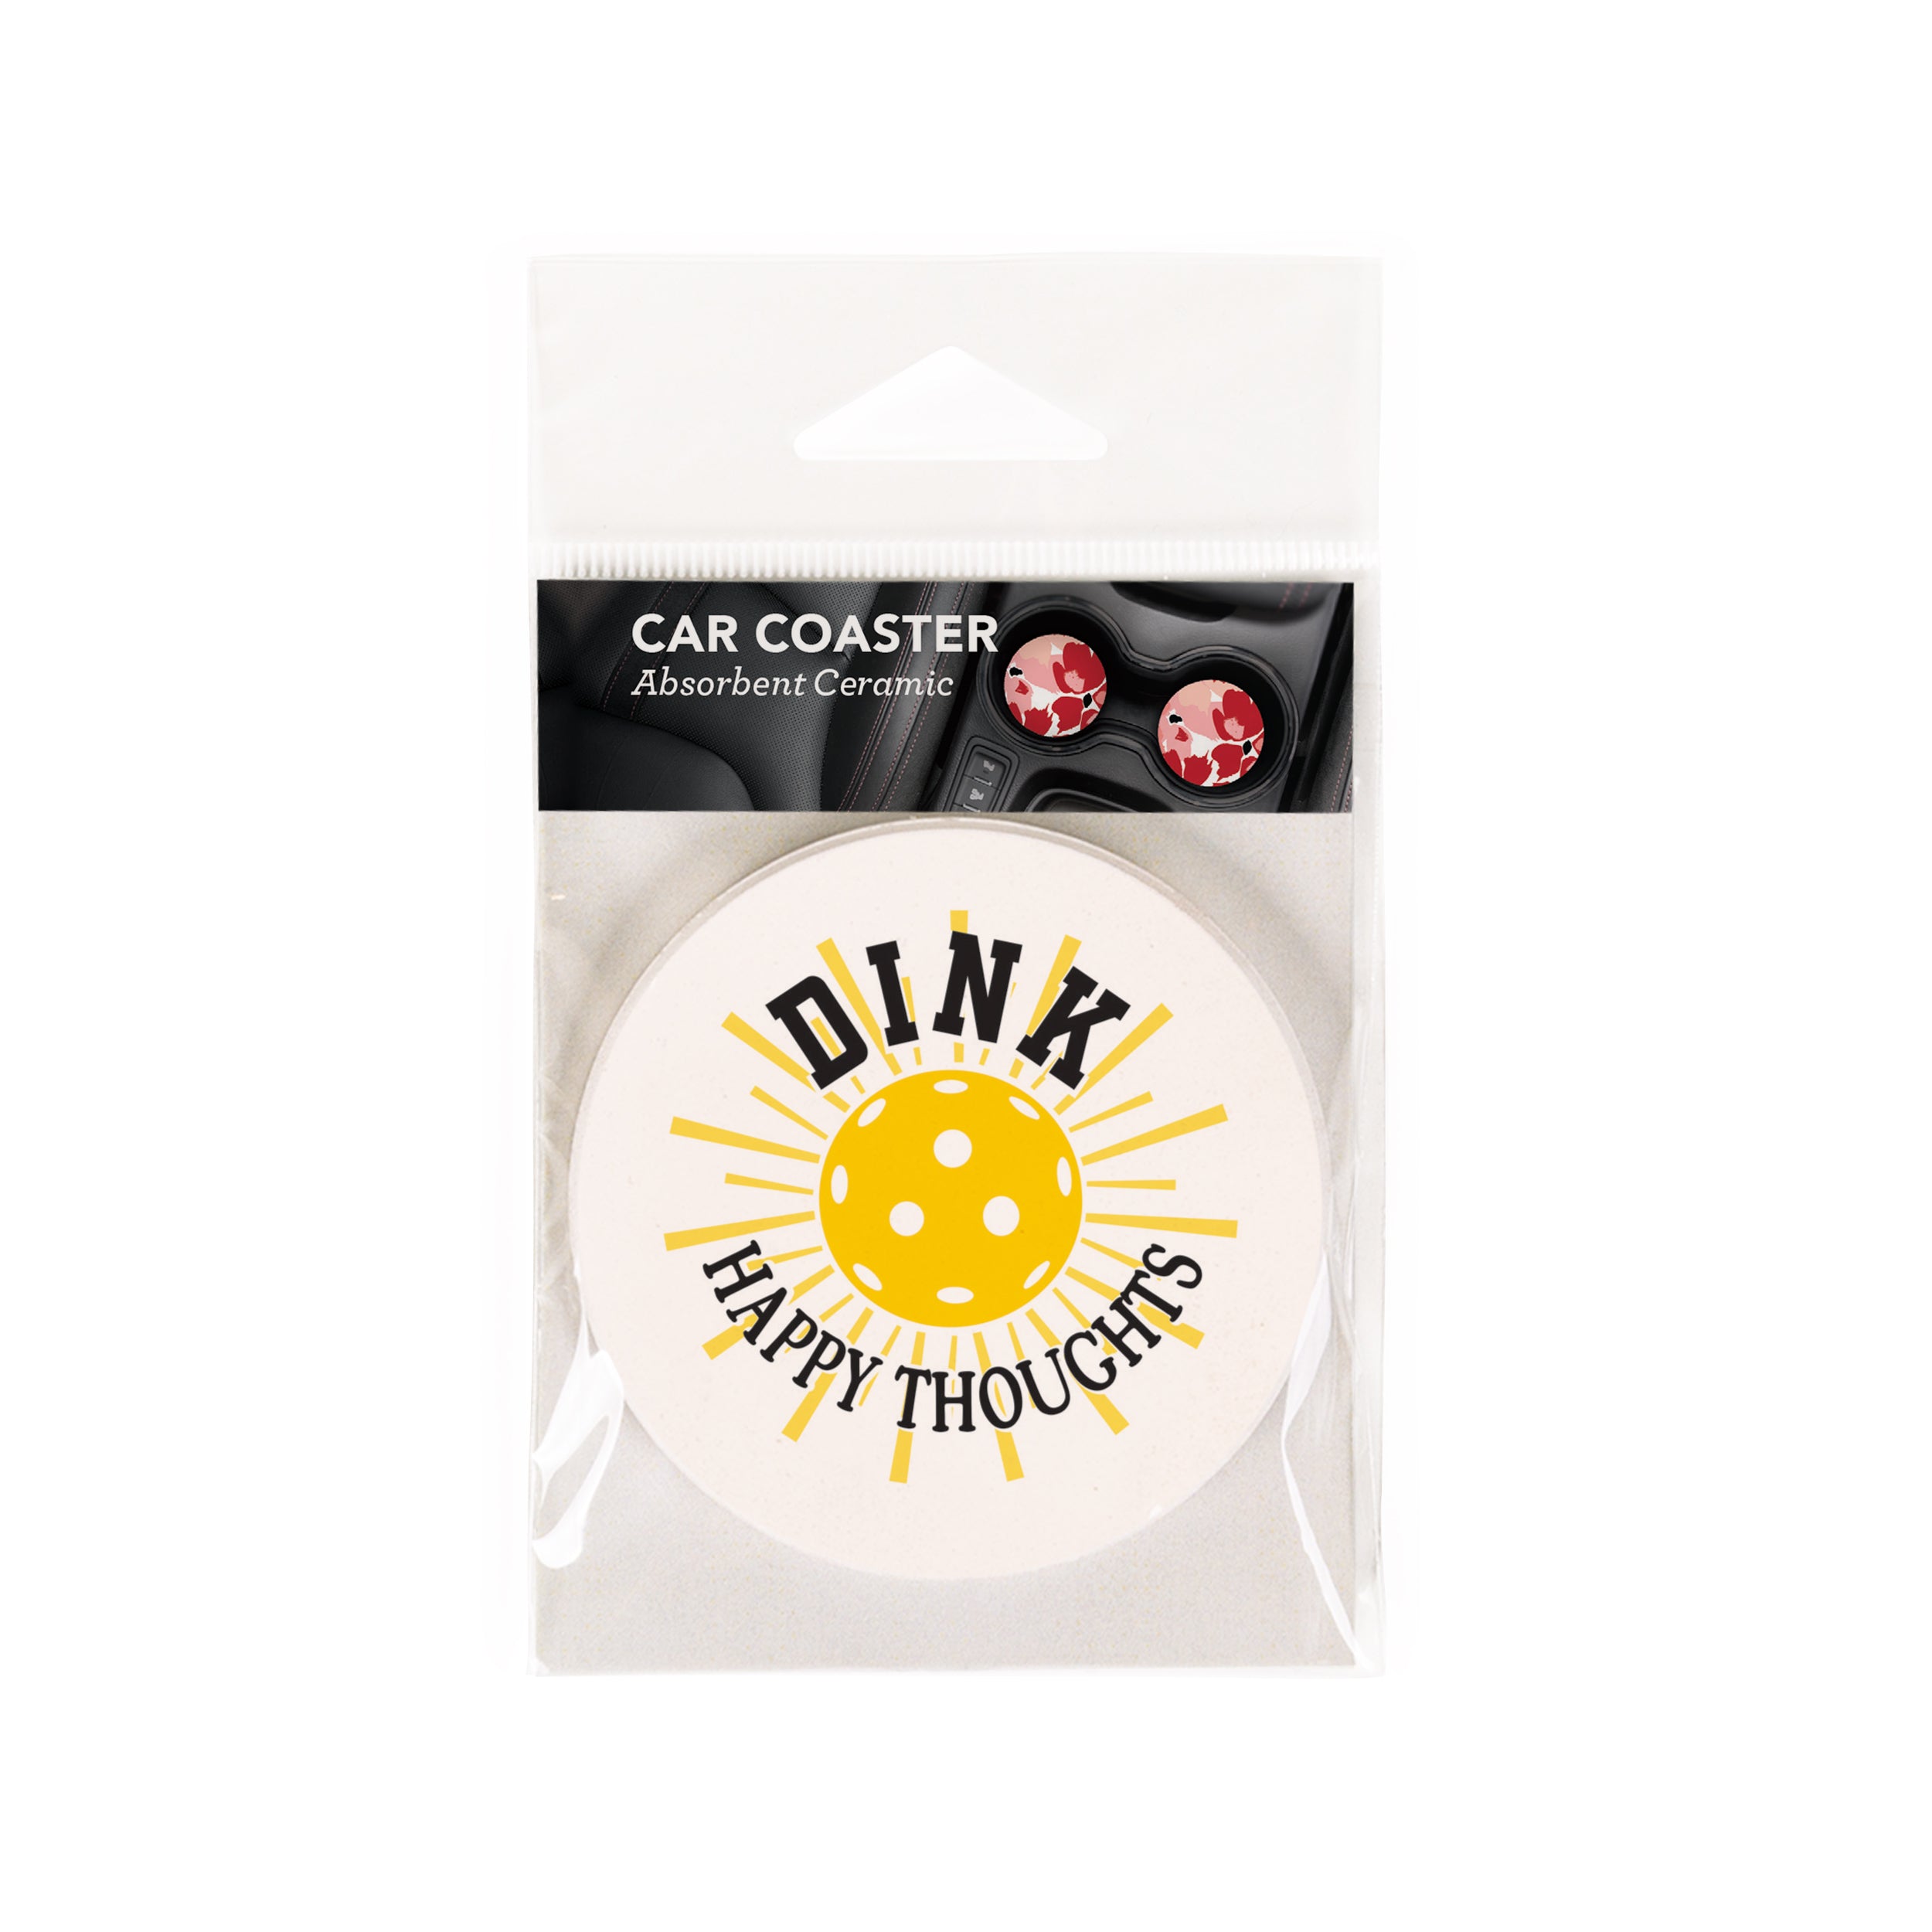 Dink Happy Thoughts Car Coaster Single Pack